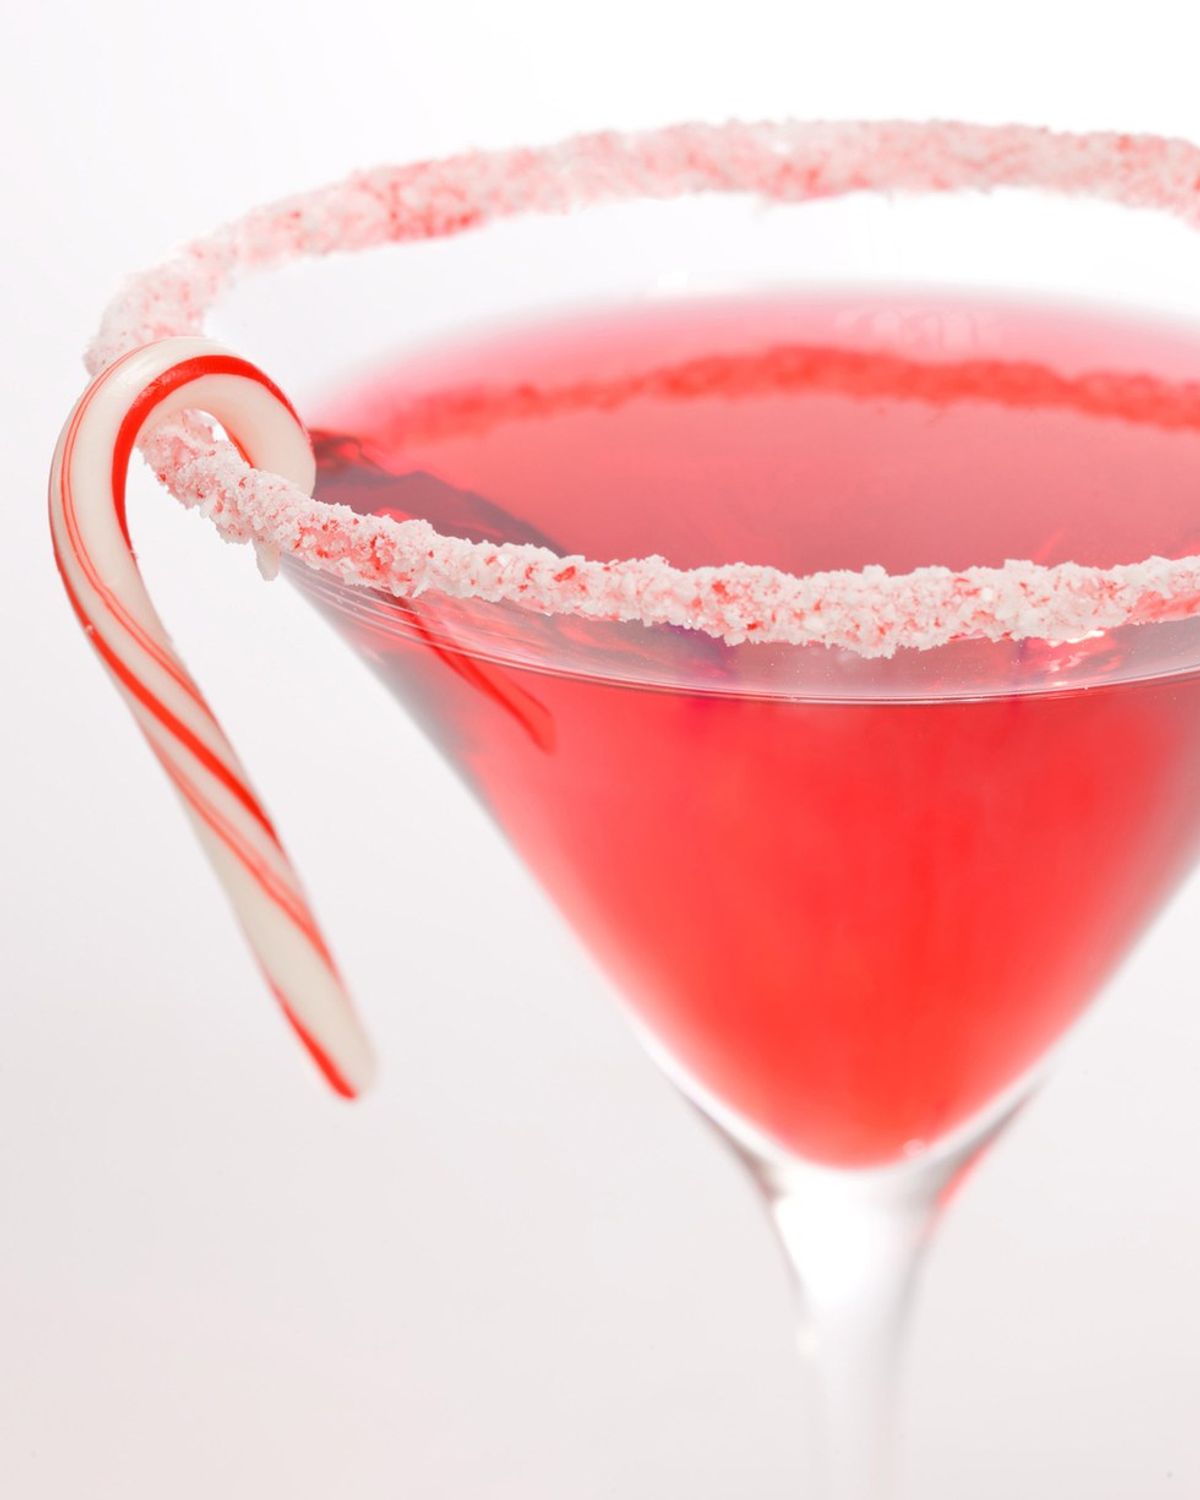 15 Winter Drinks That'll Keep The Cold Away